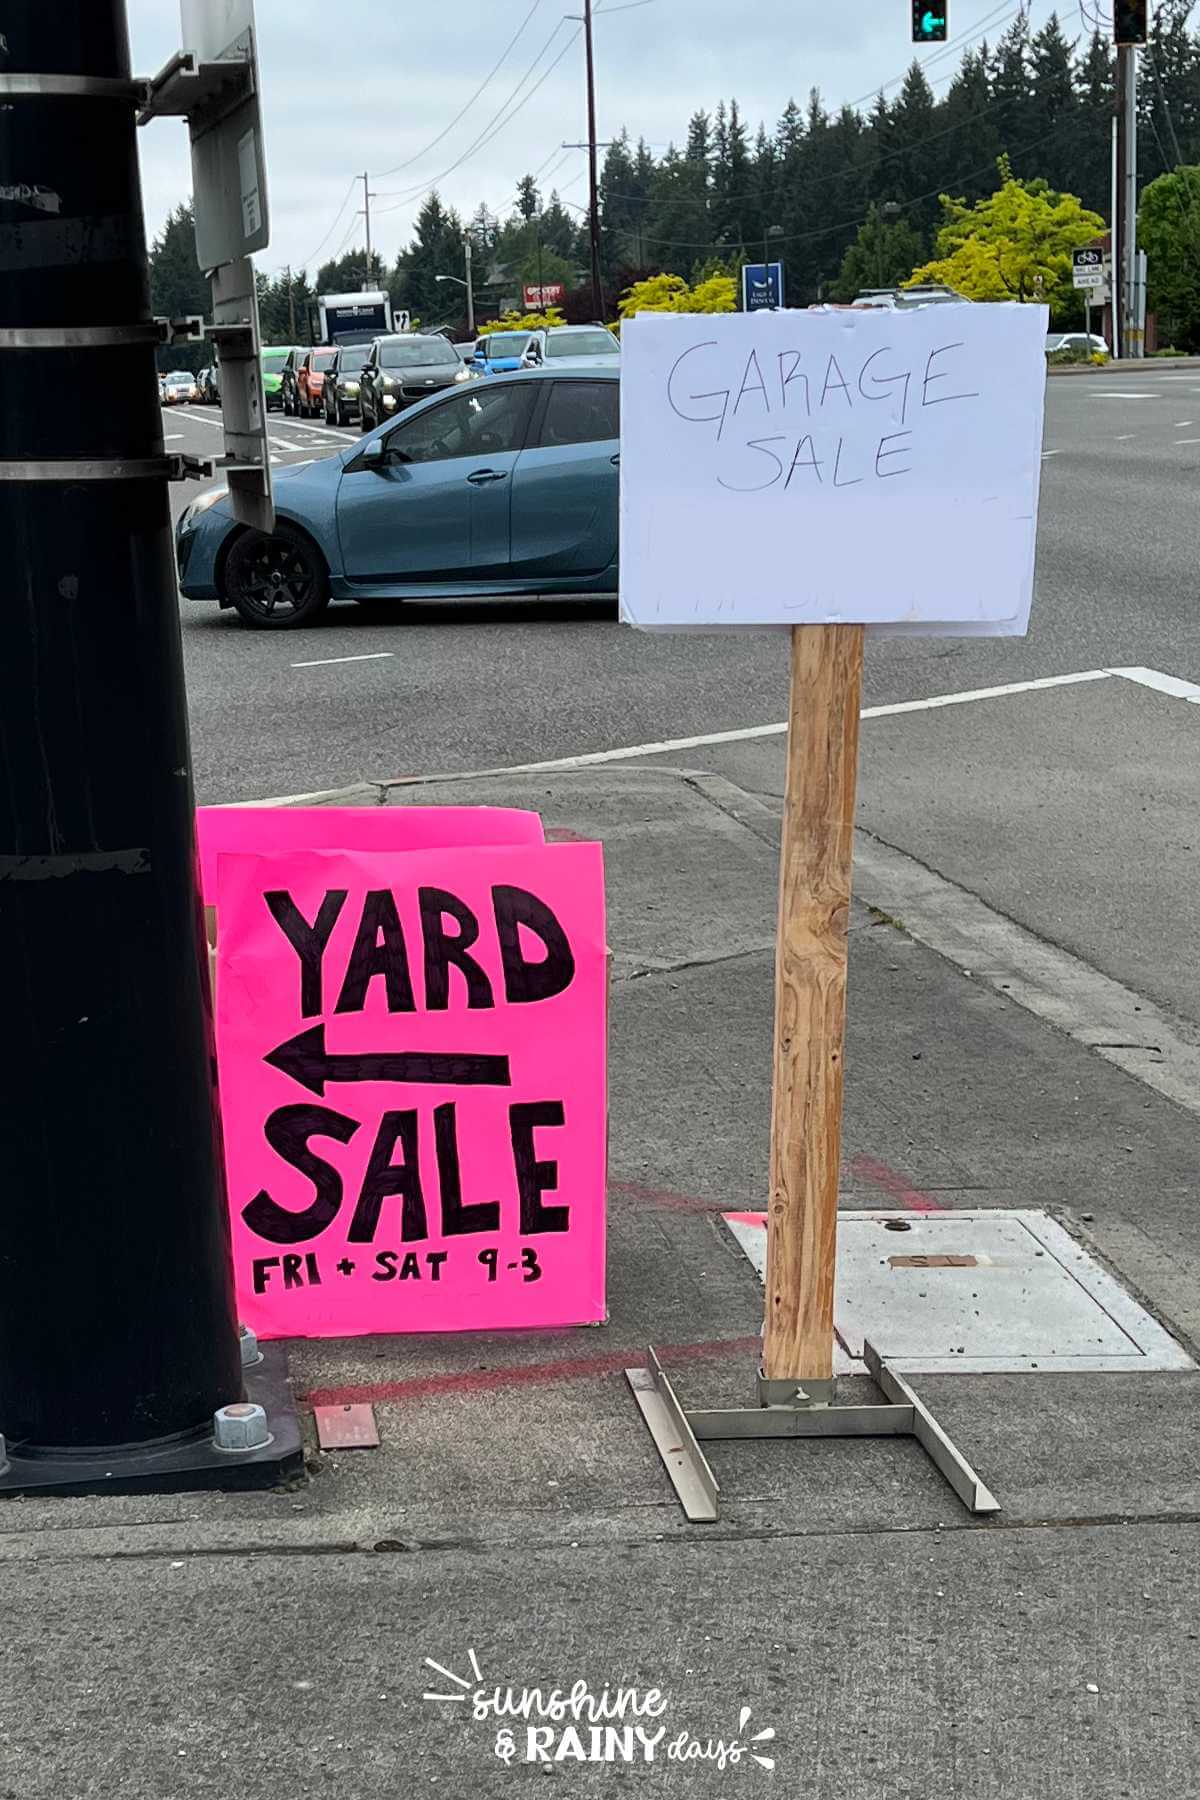 Garage Sale Signs at a busy intersection.